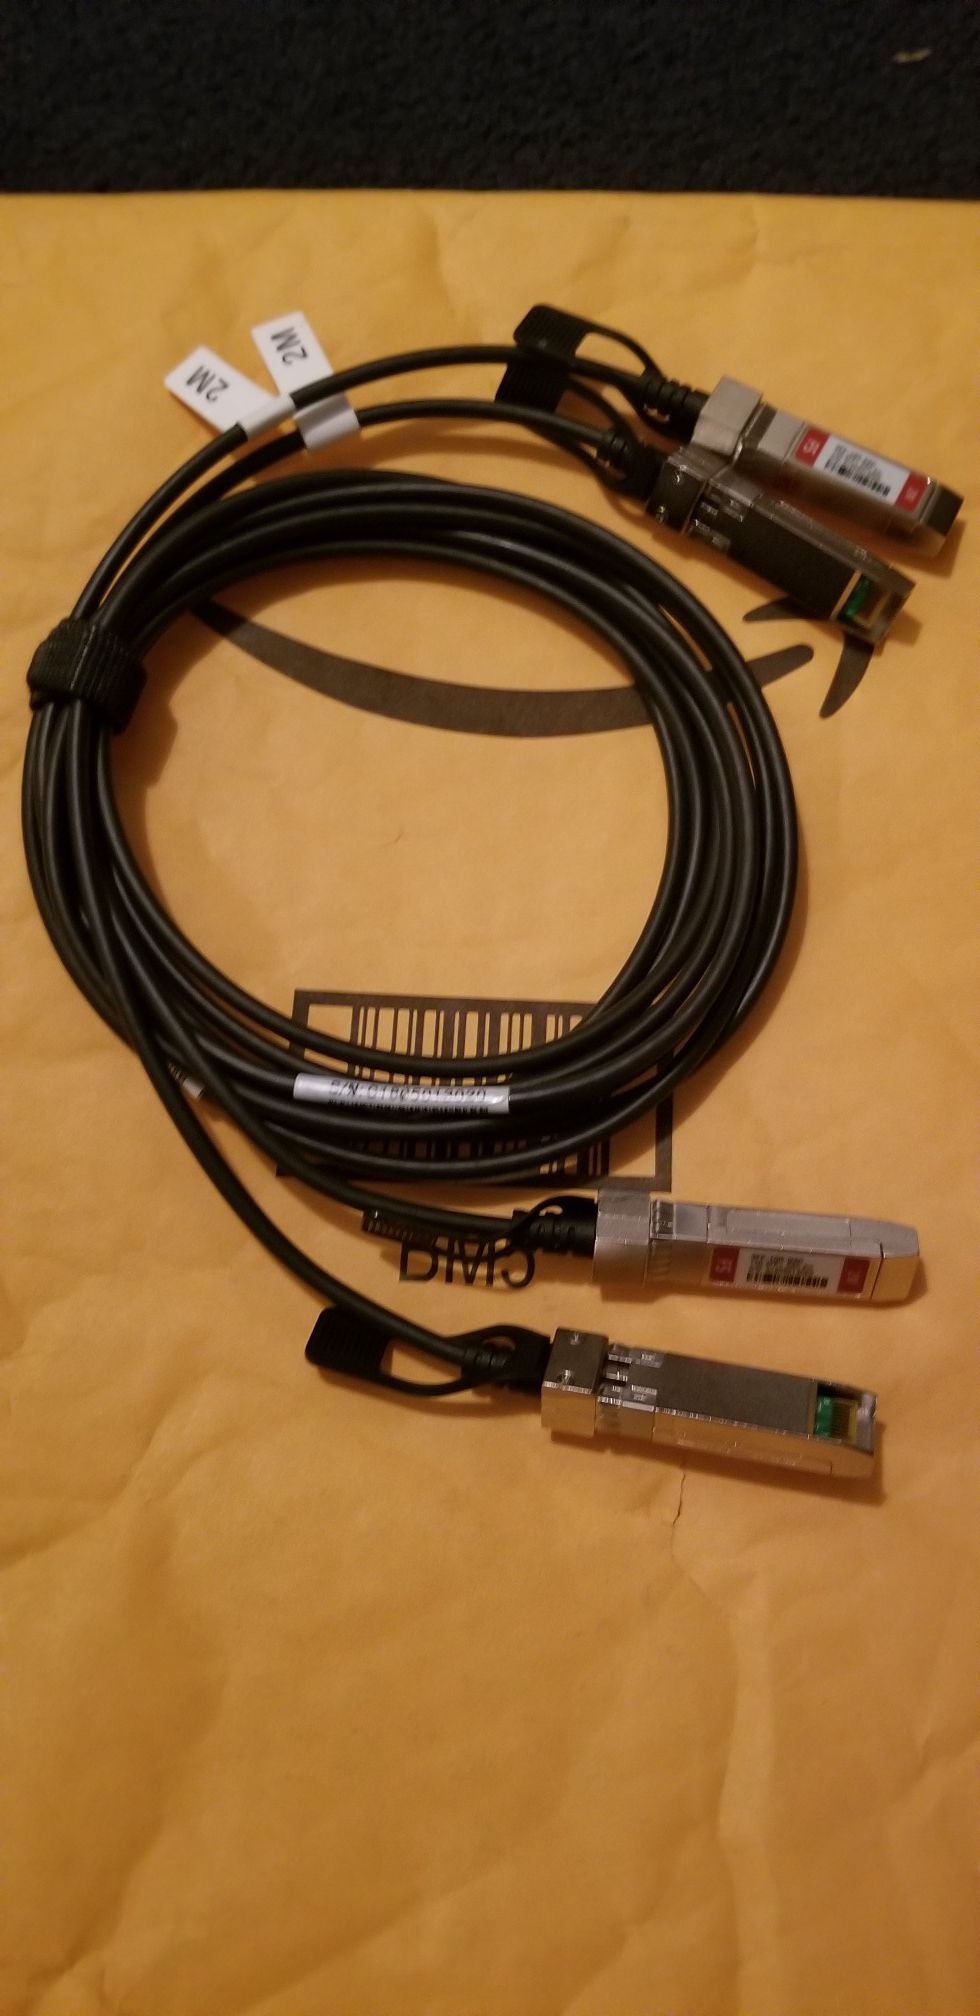 2x 2 meter DAC cables - 10G